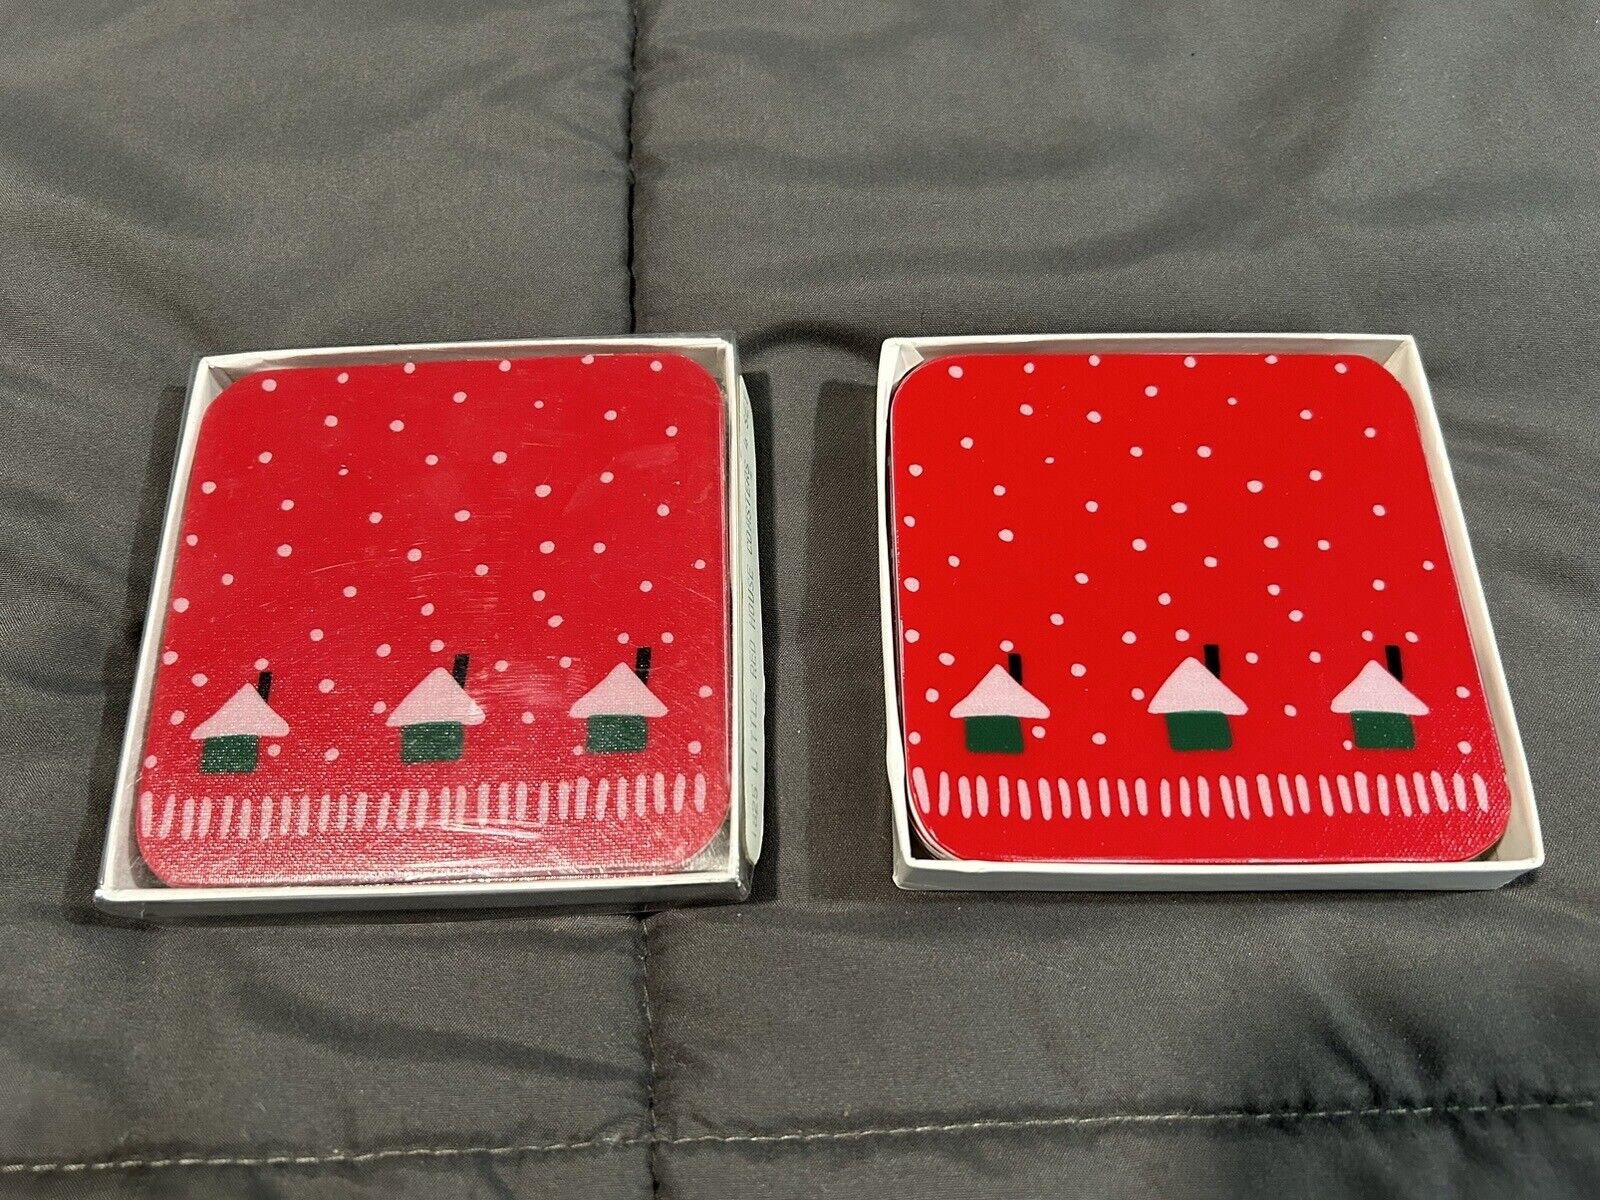 2 BOXES VINTAGE DULANE TOWLE CO LITTLE RED HOUSE COASTERS  NEVER USED